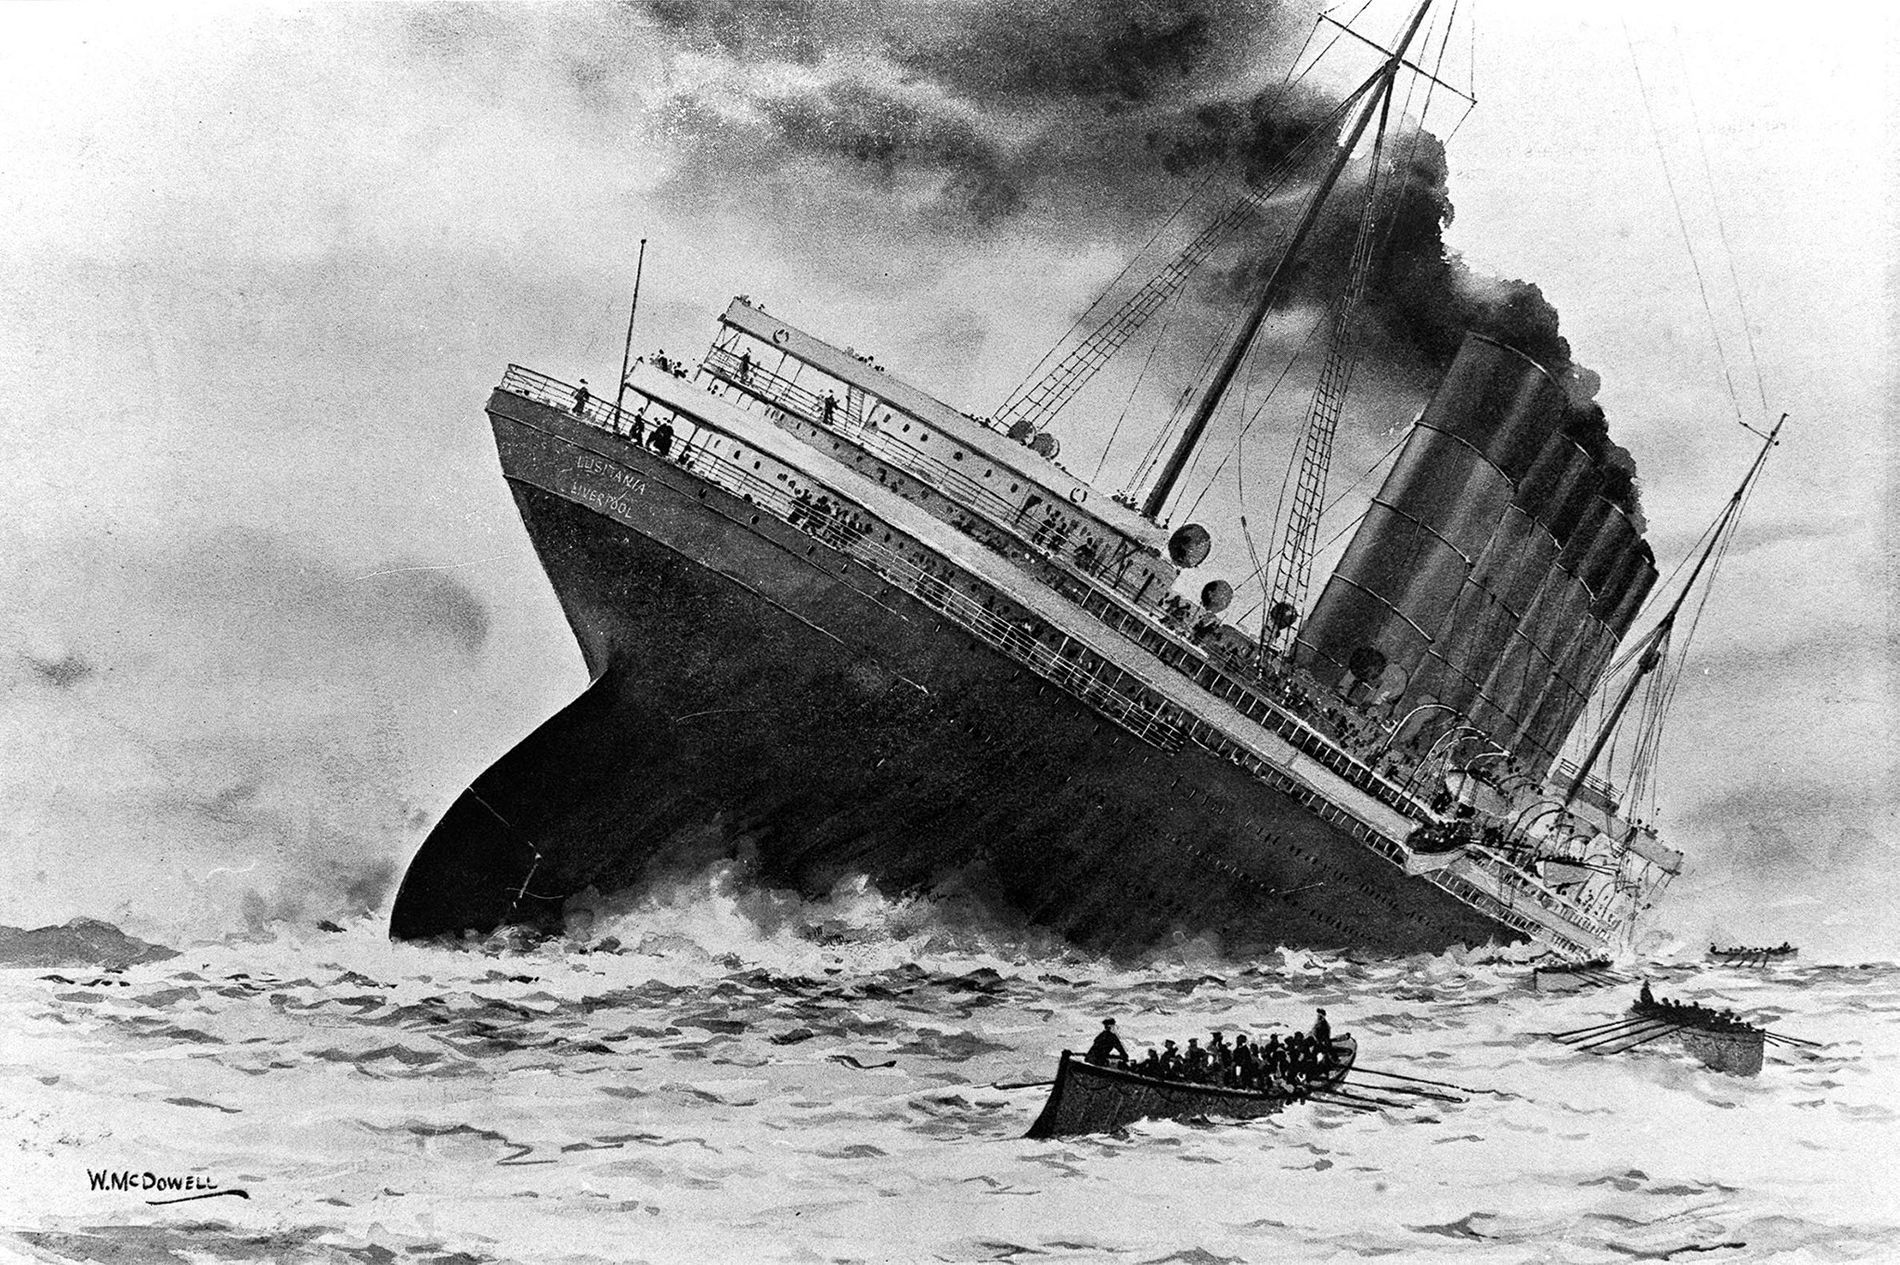 Was There A Cover Up After The Sinking Of The 'Lusitania'?